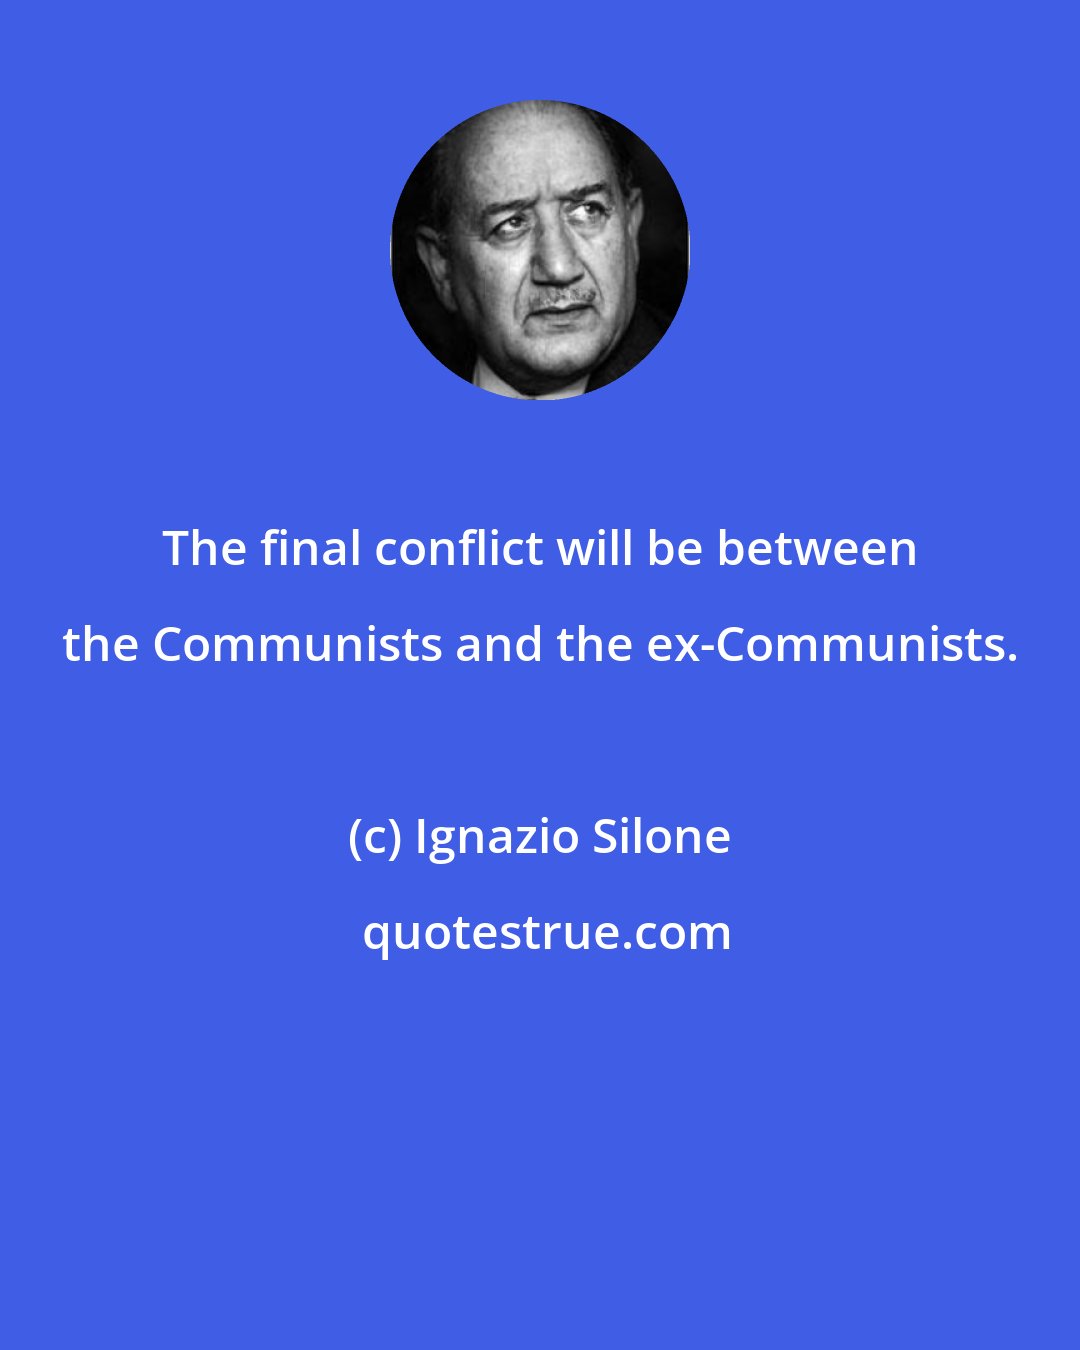 Ignazio Silone: The final conflict will be between the Communists and the ex-Communists.